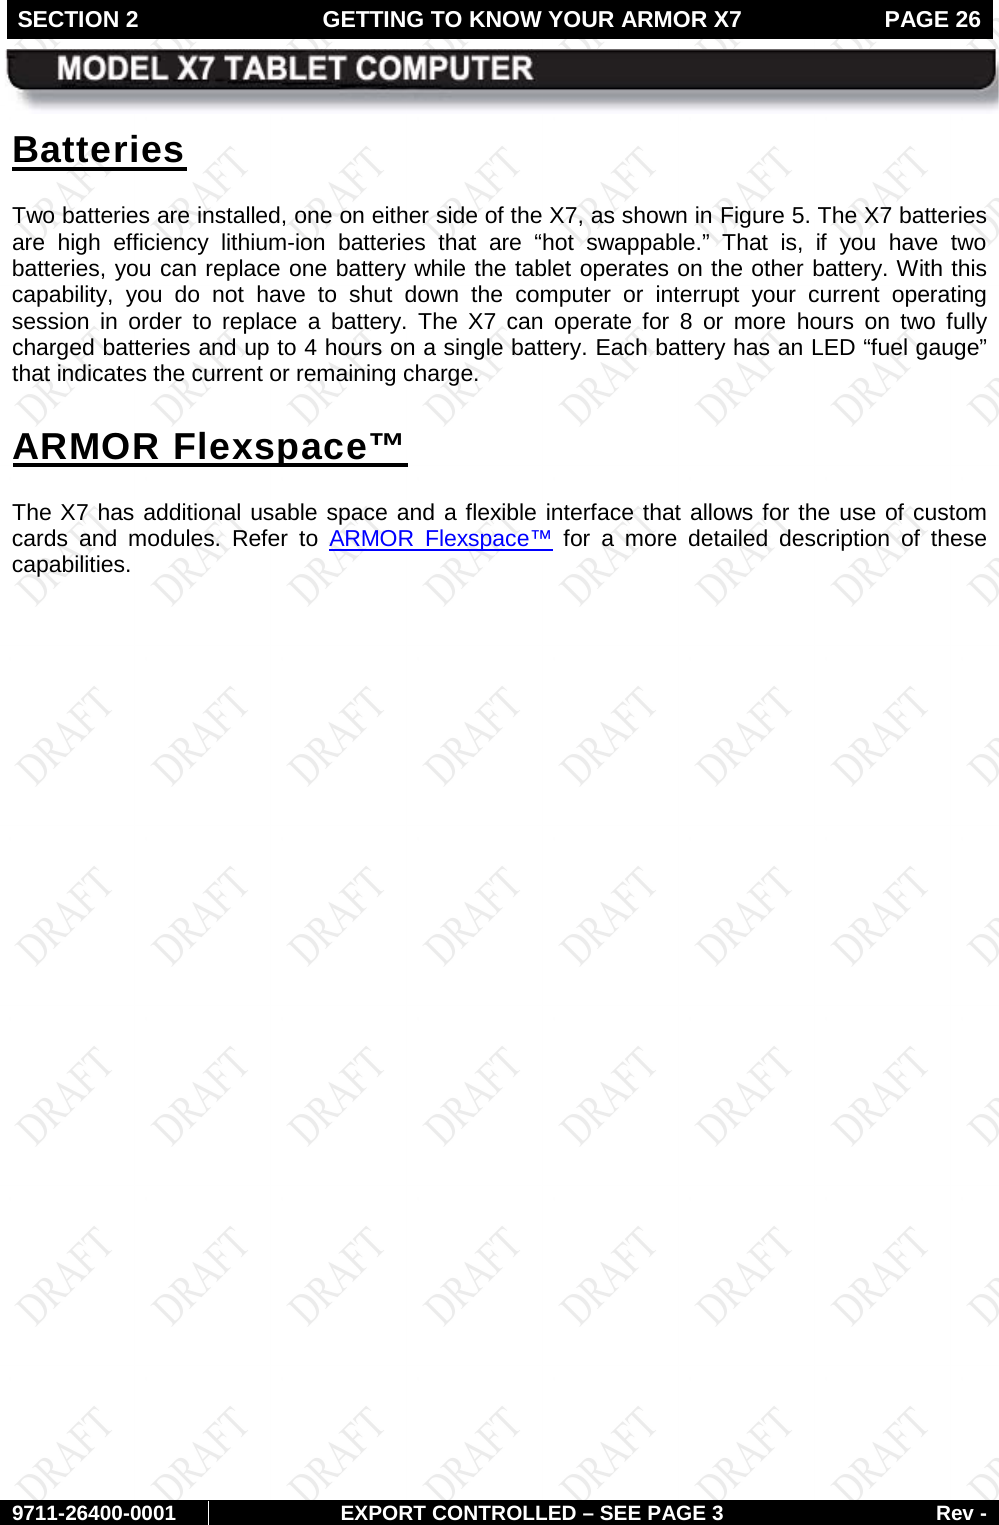 SECTION 2 GETTING TO KNOW YOUR ARMOR X7  PAGE 26        9711-26400-0001 EXPORT CONTROLLED – SEE PAGE 3 Rev - Batteries Two batteries are installed, one on either side of the X7, as shown in Figure 5. The X7 batteries are high efficiency lithium-ion batteries that are “hot swappable.” That is, if you have two batteries, you can replace one battery while the tablet operates on the other battery. With this capability, you do not have to shut down the computer or interrupt your current operating session in order to replace a battery. The X7 can operate for 8 or more hours on two fully charged batteries and up to 4 hours on a single battery. Each battery has an LED “fuel gauge” that indicates the current or remaining charge. ARMOR Flexspace™ The X7 has additional usable space and a flexible interface that allows for the use of custom cards and modules. Refer to ARMOR Flexspace™ for a more detailed description of these capabilities.      